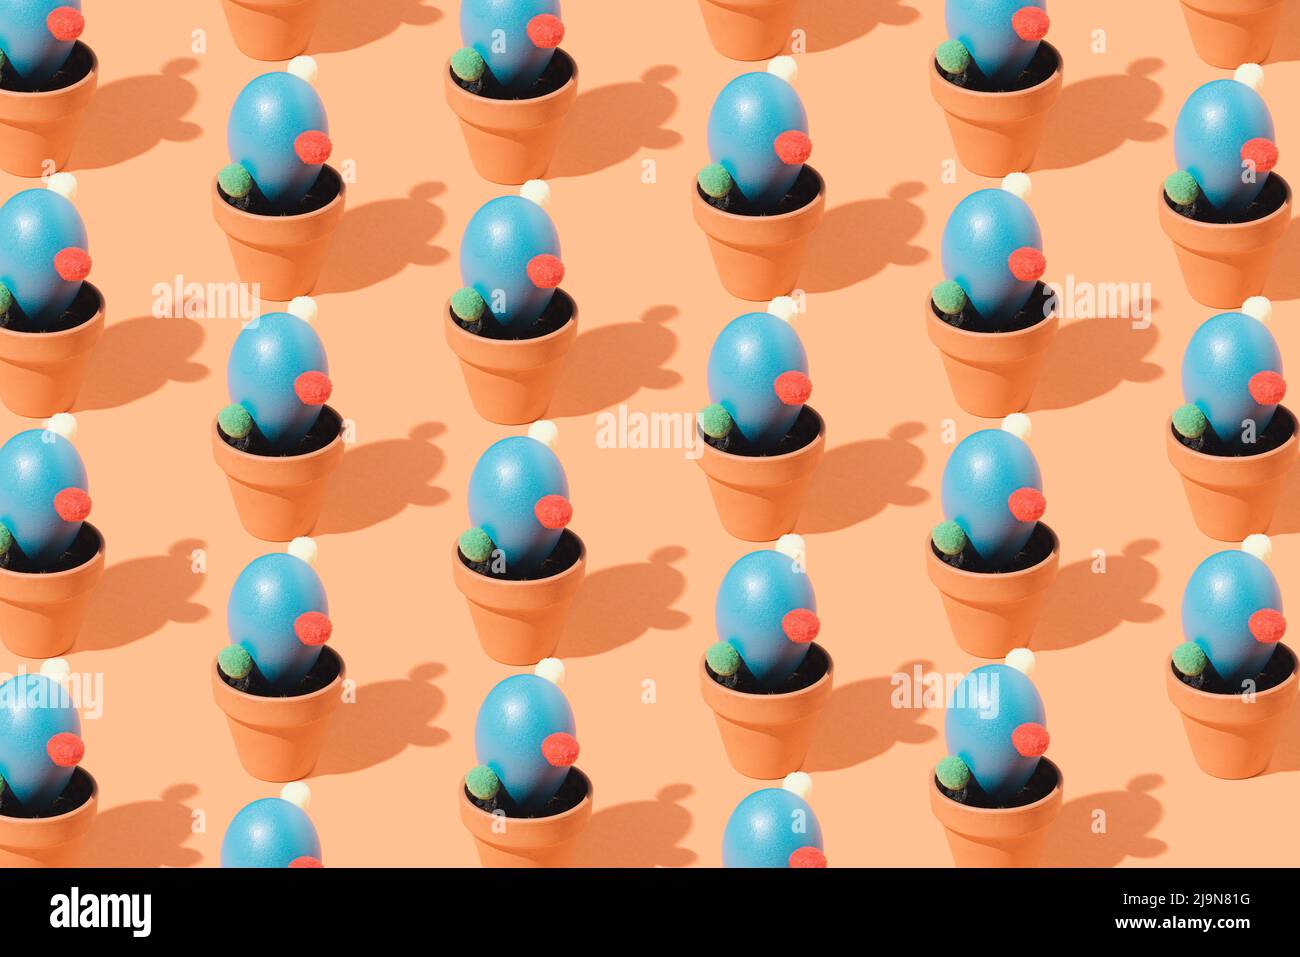 Creative colorful pattern of blue cactus shaped eggs in a flower pots on a brown background. Isometric layout. Easter wallpaper. Stock Photo